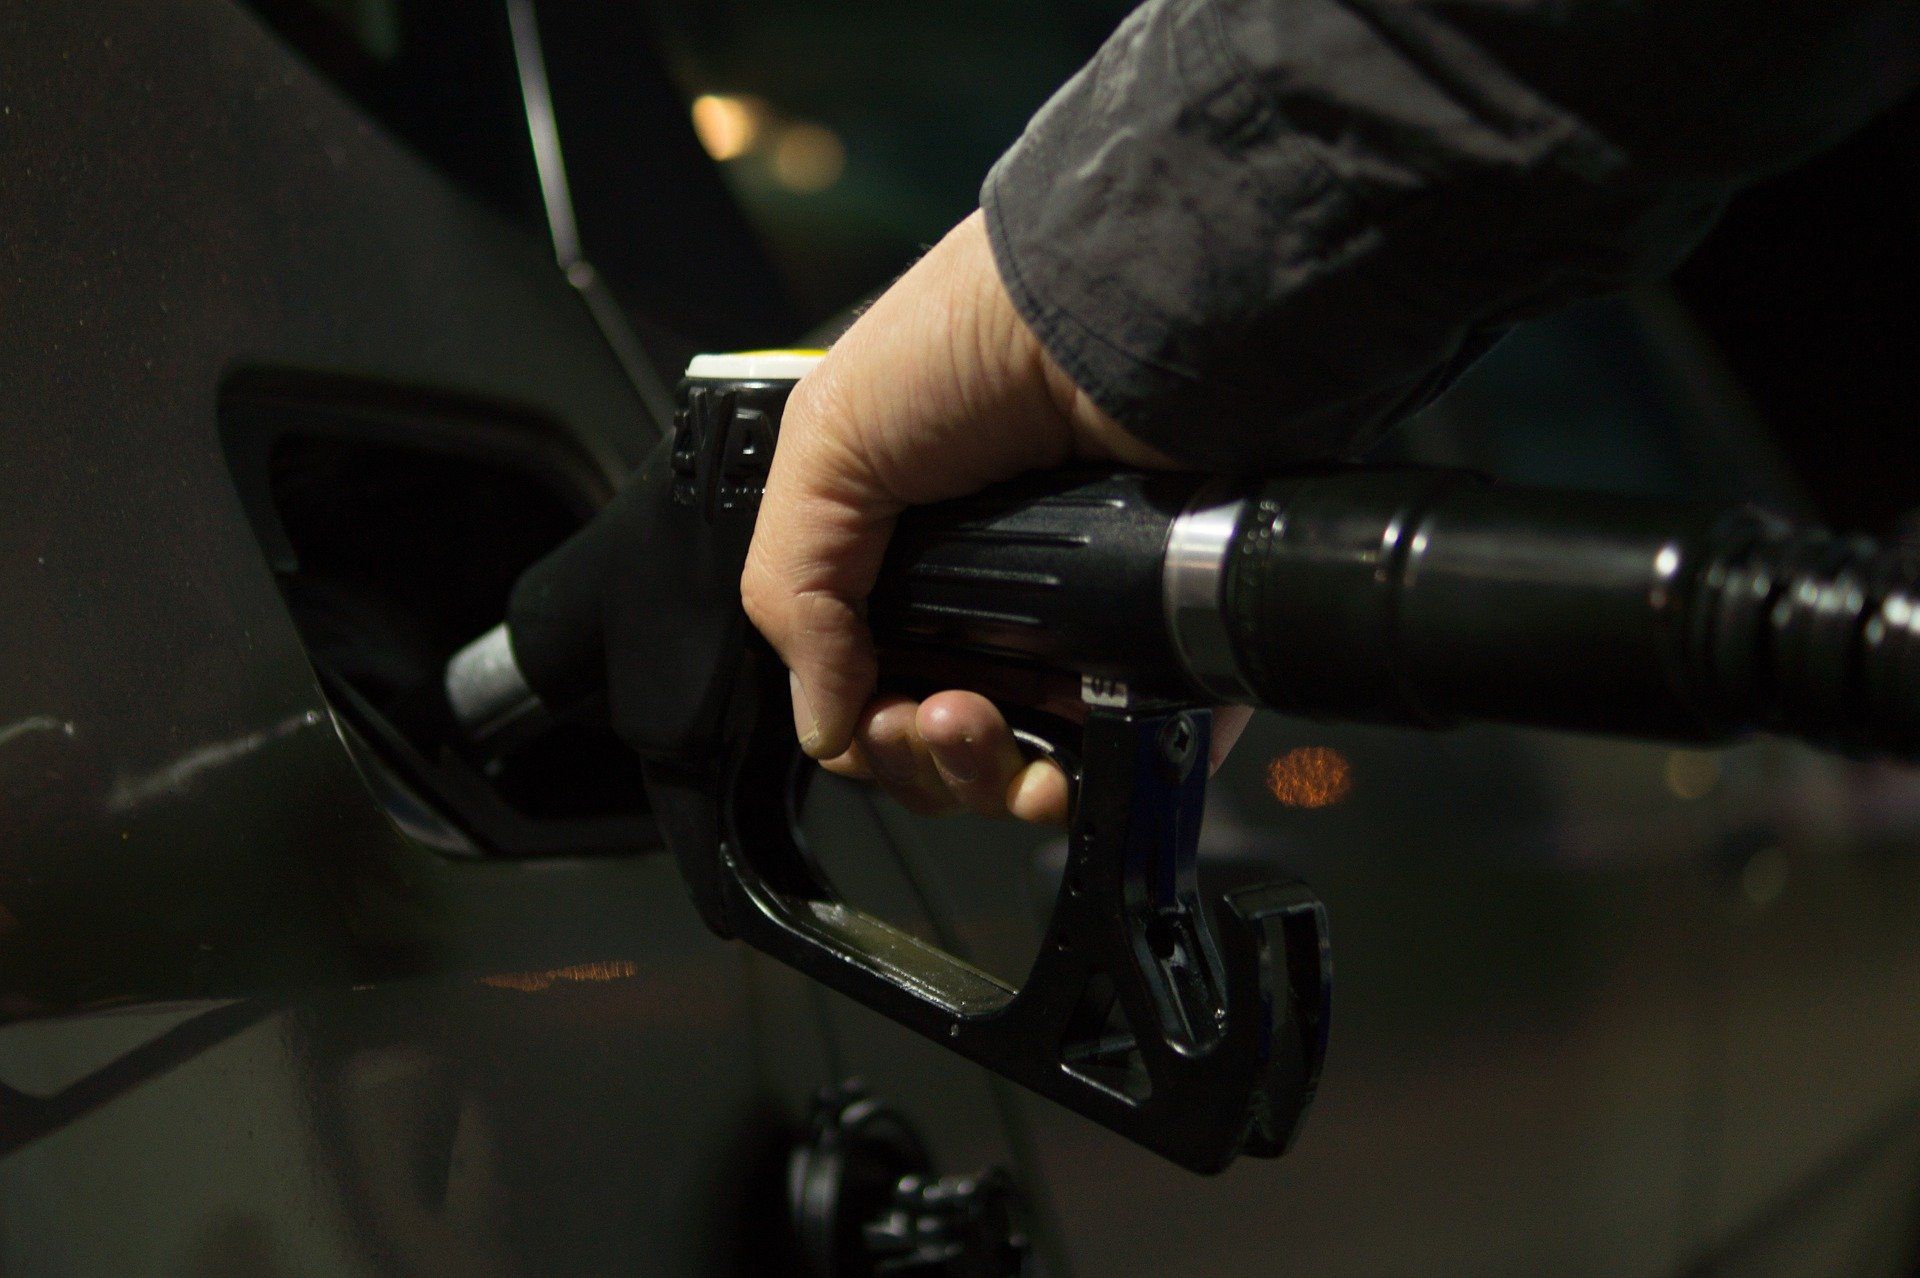 Fuel price hike: Petrol and Diesel rates increased by 80 paise on April 6, 2022